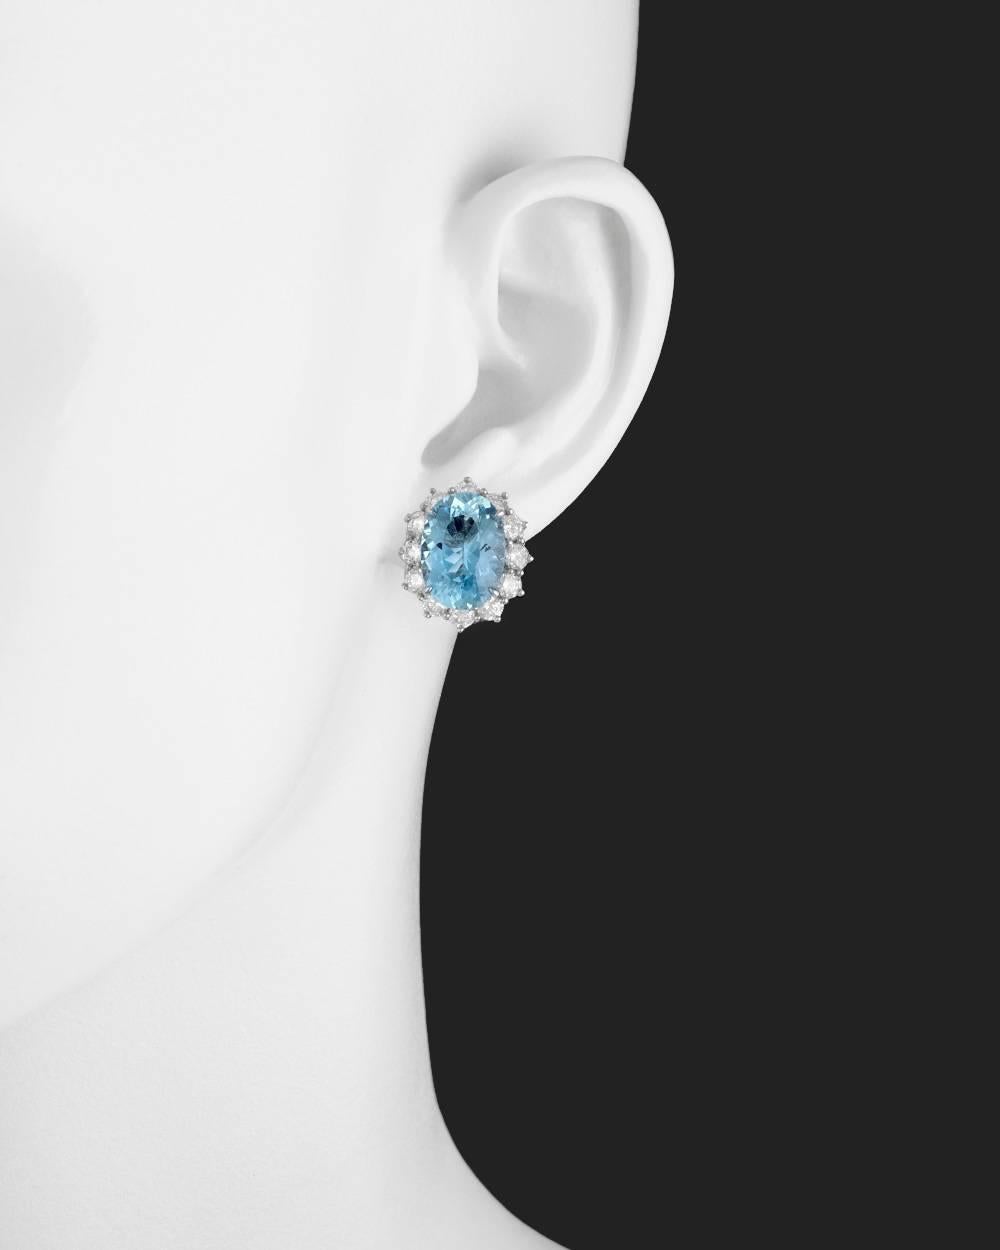 Cluster earrings, showcasing a larger oval-shaped aquamarine surrounded by round brilliant-cut diamonds, mounted in platinum.  Two aquamarines weighing 10.76 total carats and twenty-four diamonds weighing 2.84 total carats. Omega-style clip backs